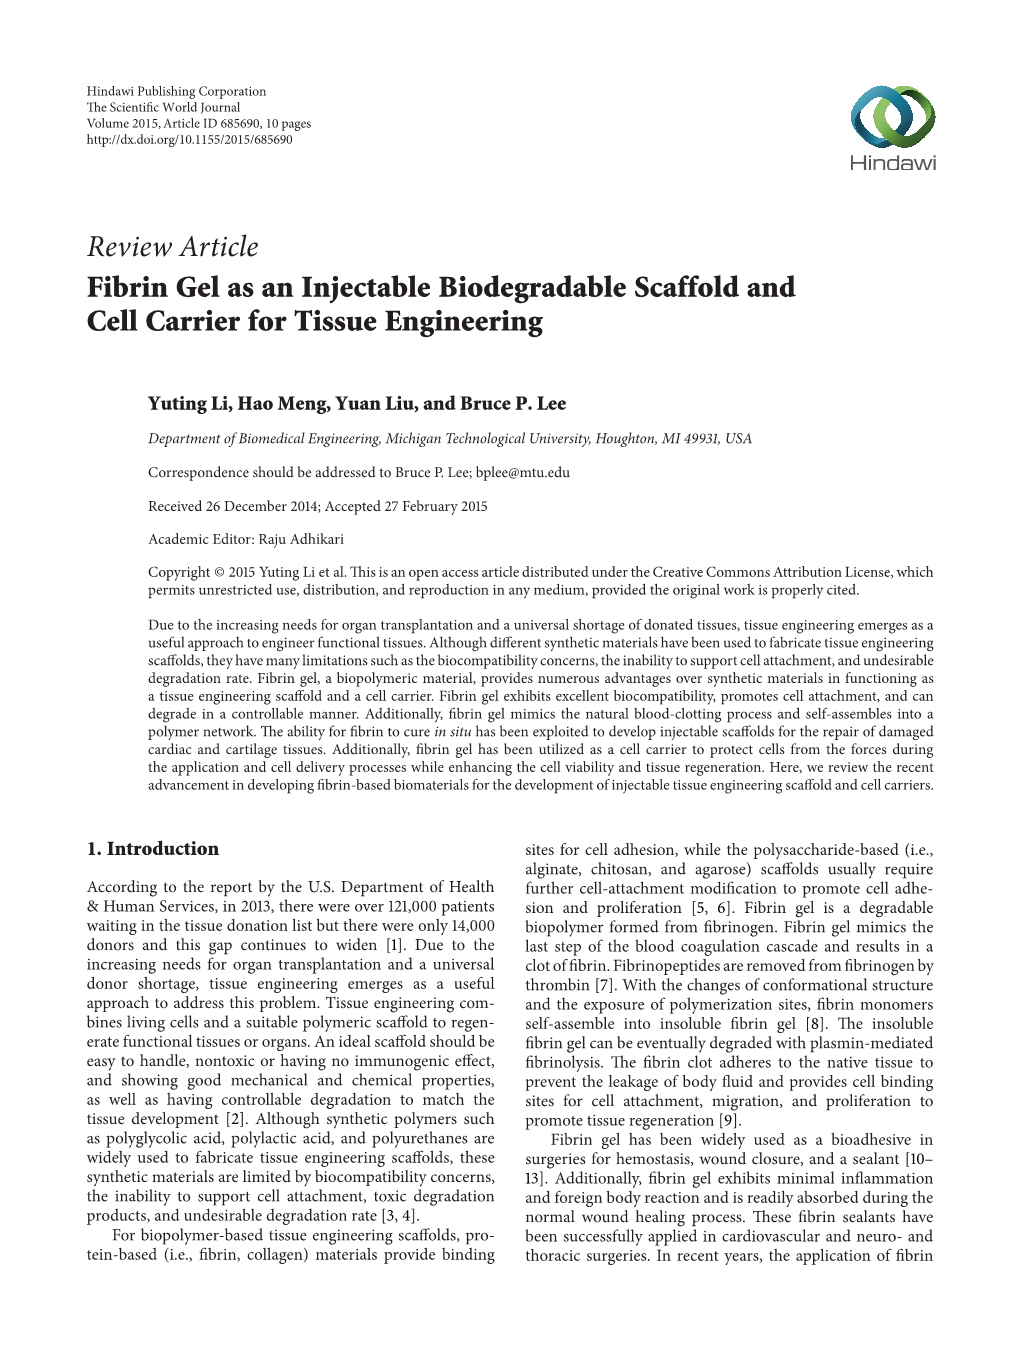 Fibrin Gel As an Injectable Biodegradable Scaffold and Cell Carrier for Tissue Engineering